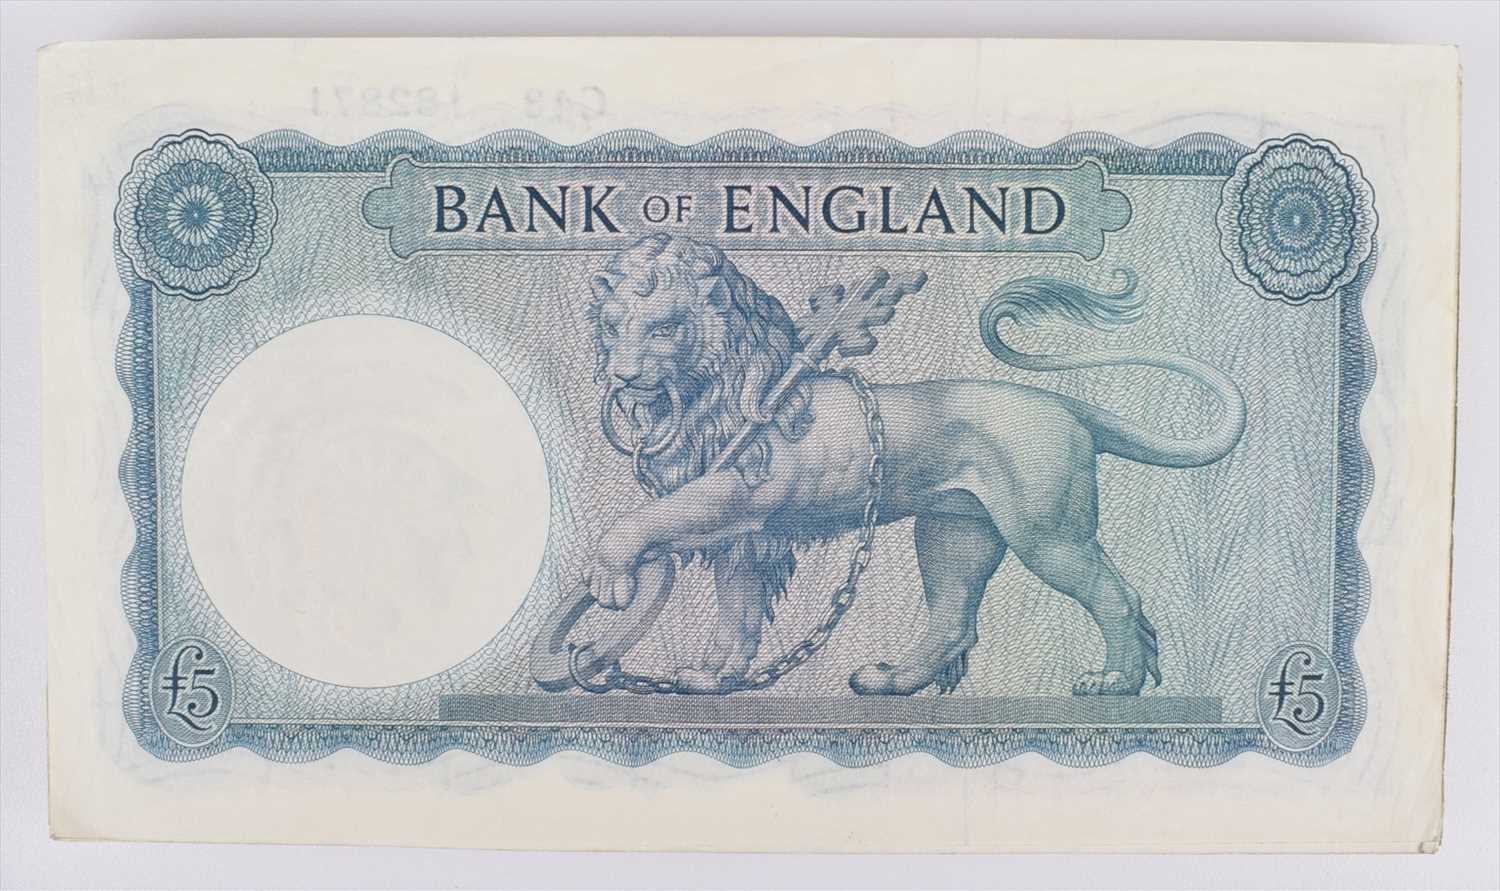 Forty-four Series "B" Helmeted Britannia Issue (February 1957), Five Pounds banknotes (44). - Image 2 of 2